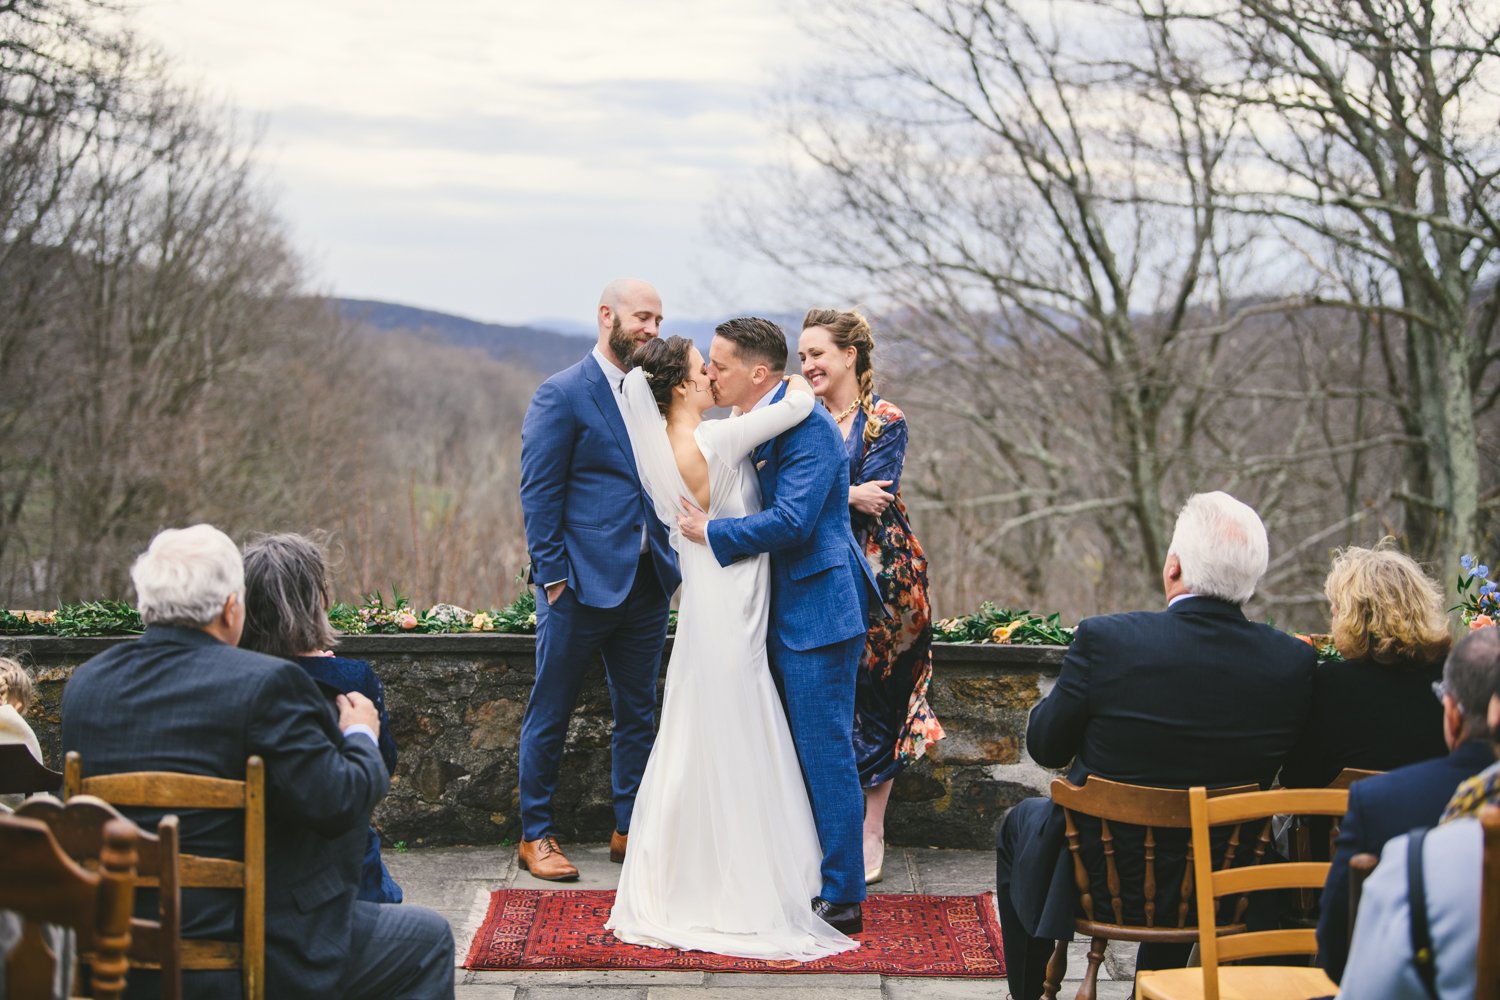 Bride and groom kiss at the altar.

Upstate New York Wedding Photography. Cold Spring NY Wedding Photography. Luxury Local Wedding Photographer. Destination Wedding Photographer.